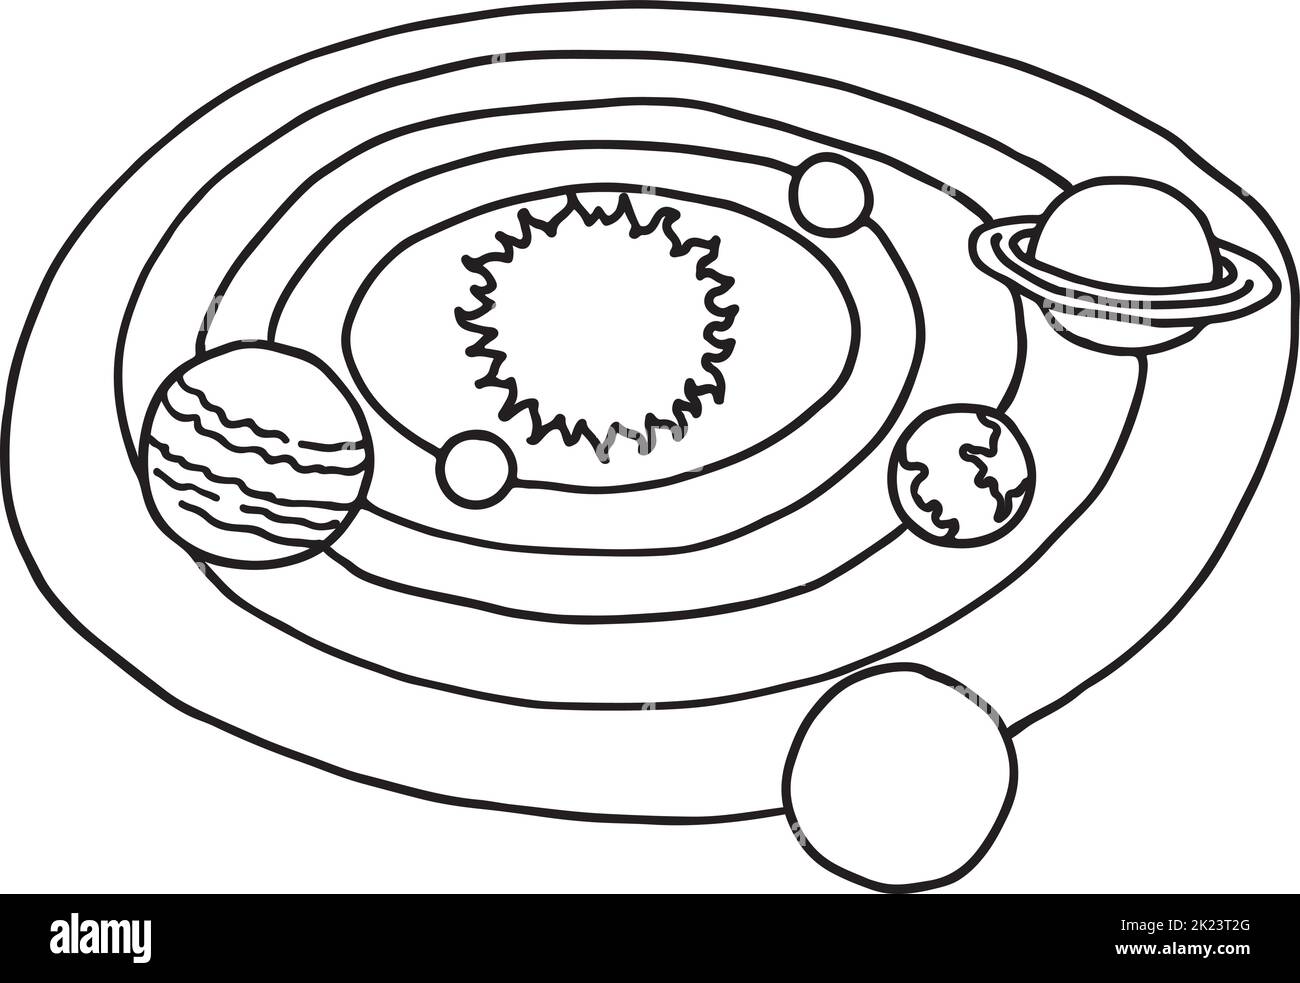 Solar system doodle. Hand drawn sun and planets Stock Vector